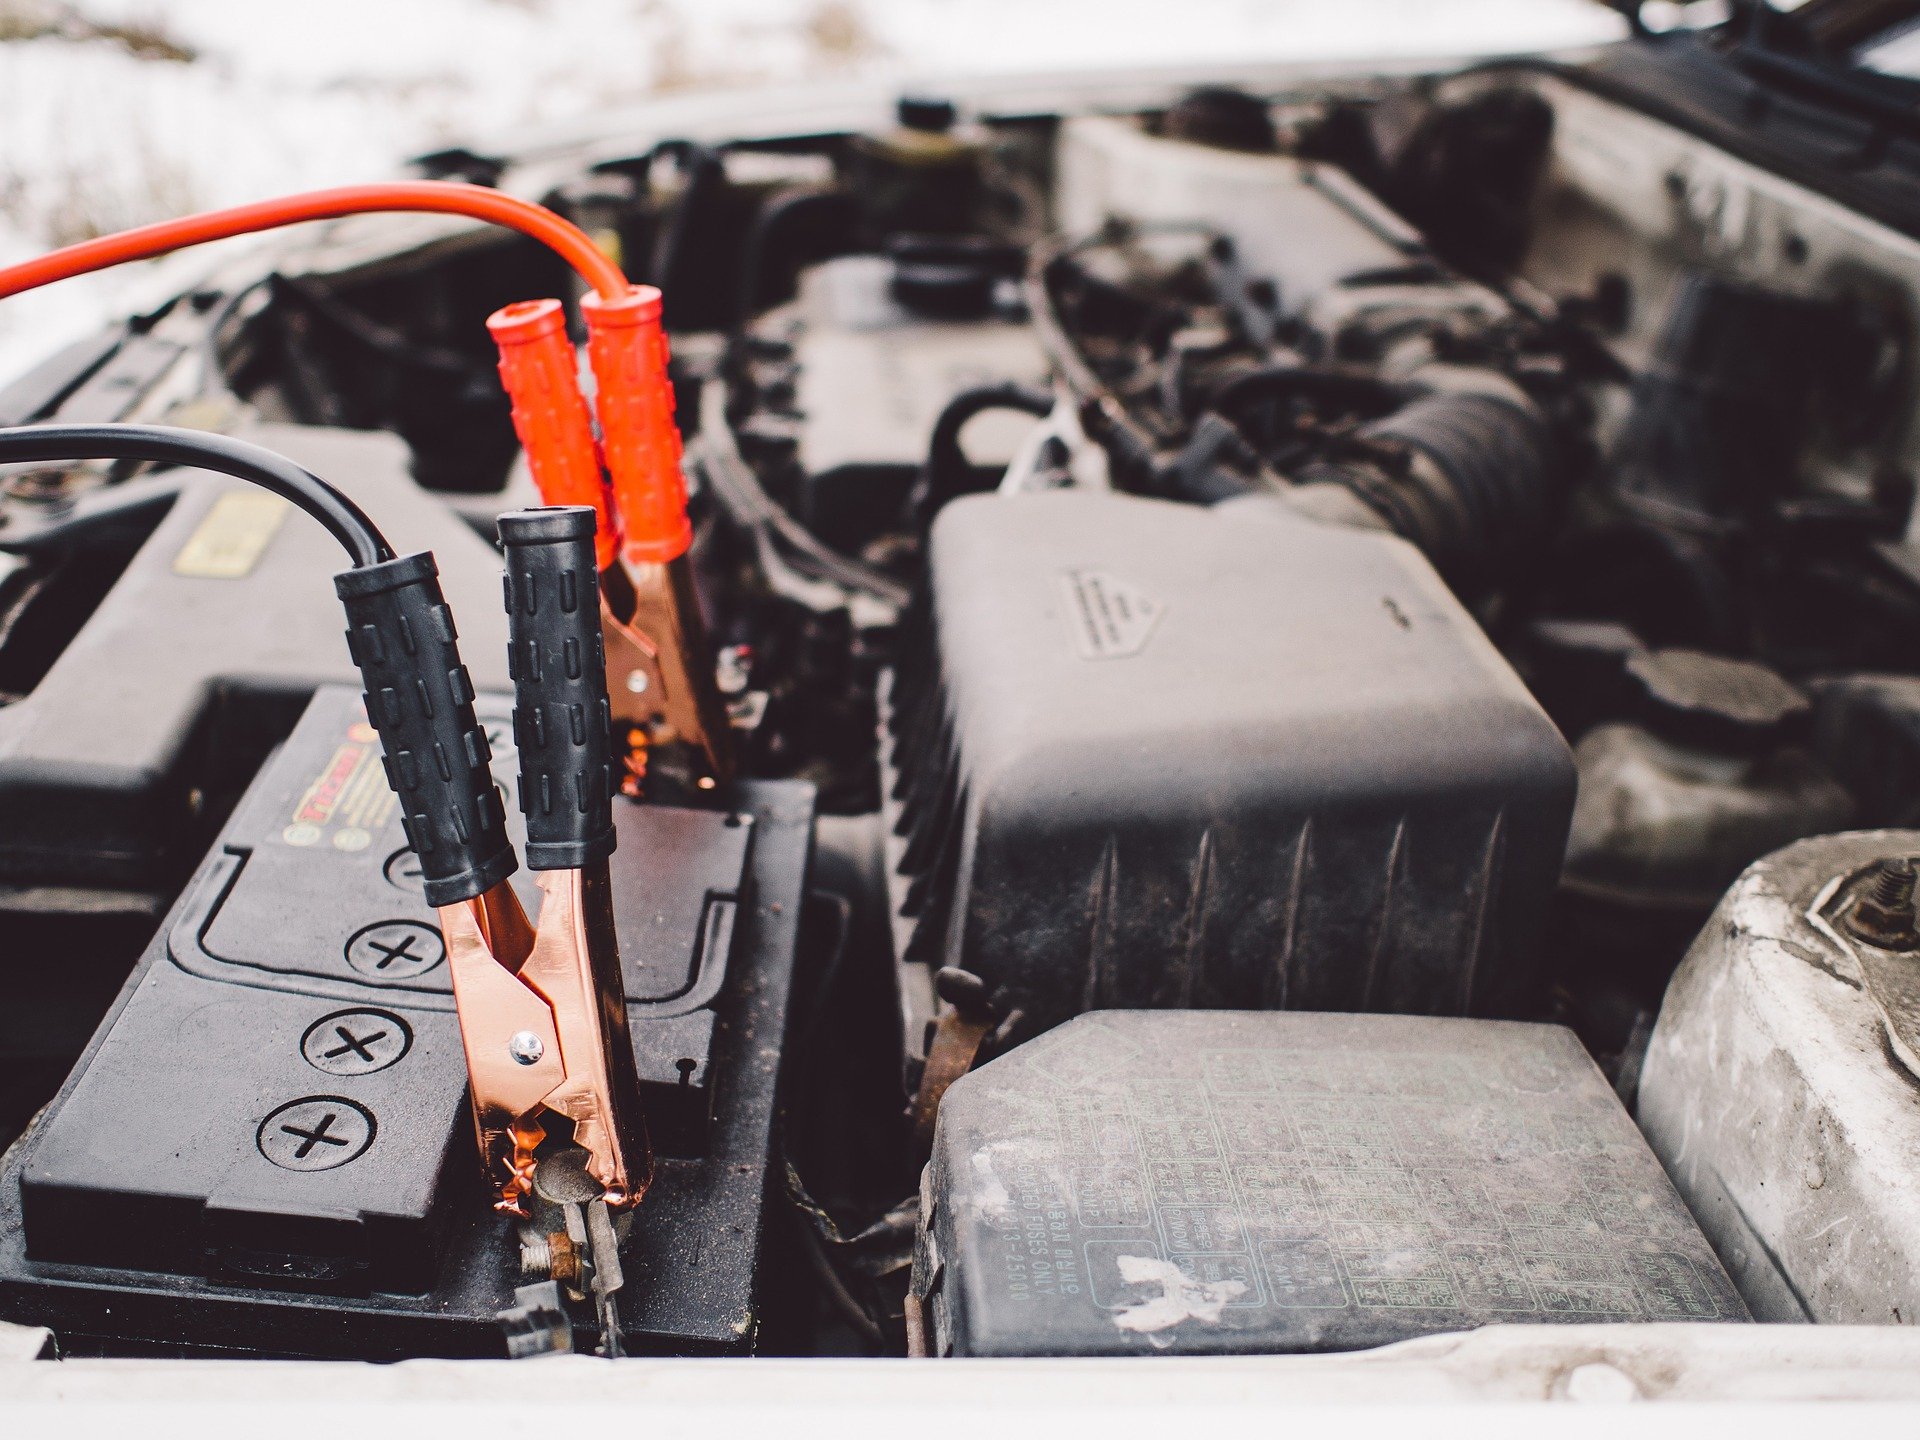 https://www.smarttoyota.com/blogs/2398/wp-content/uploads/2020/12/How-to-Jump-Start-Your-Car-This-Winter.jpg